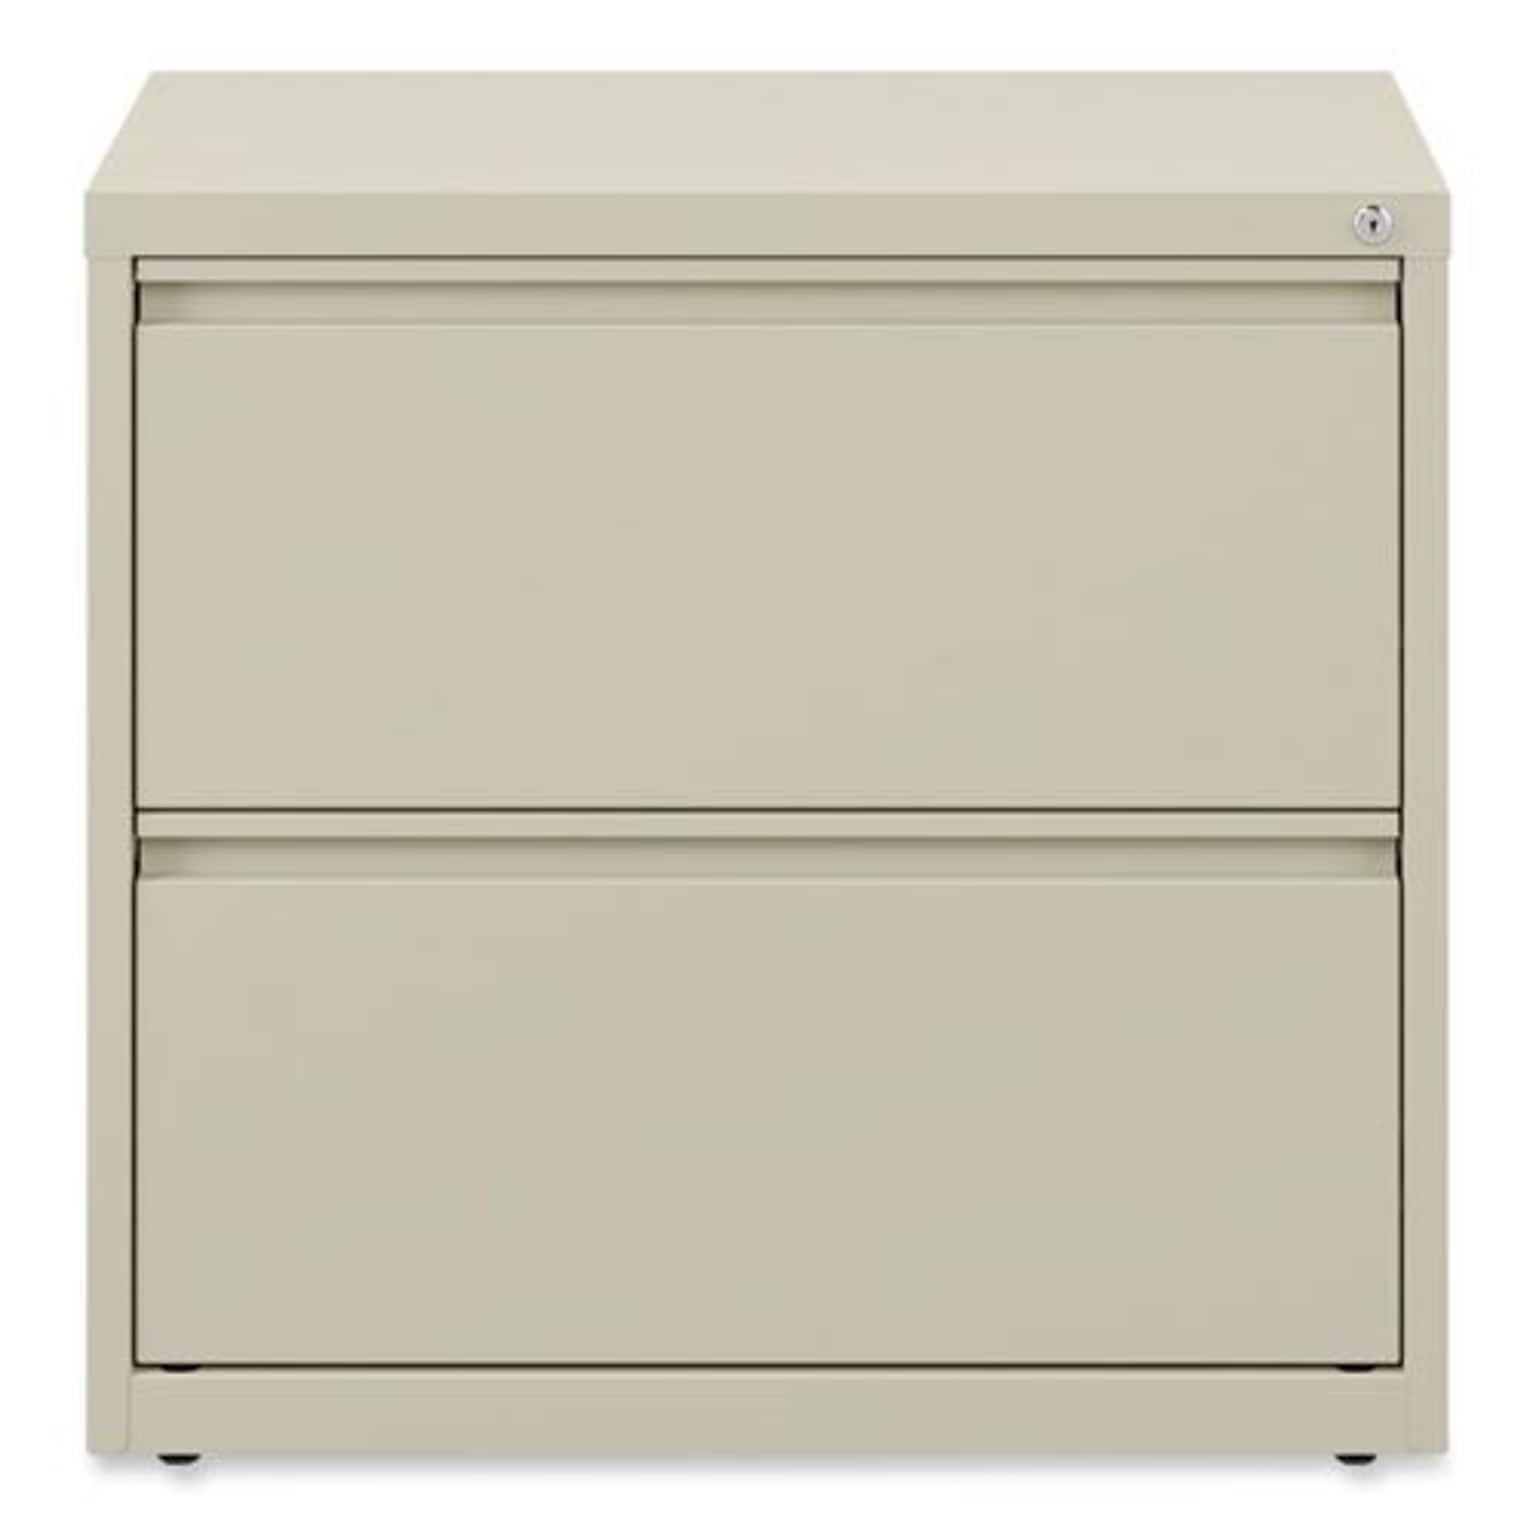 Alera® 2-Drawer Lateral File Cabinet; Putty, Letter/Legal (ALELA523029PY)